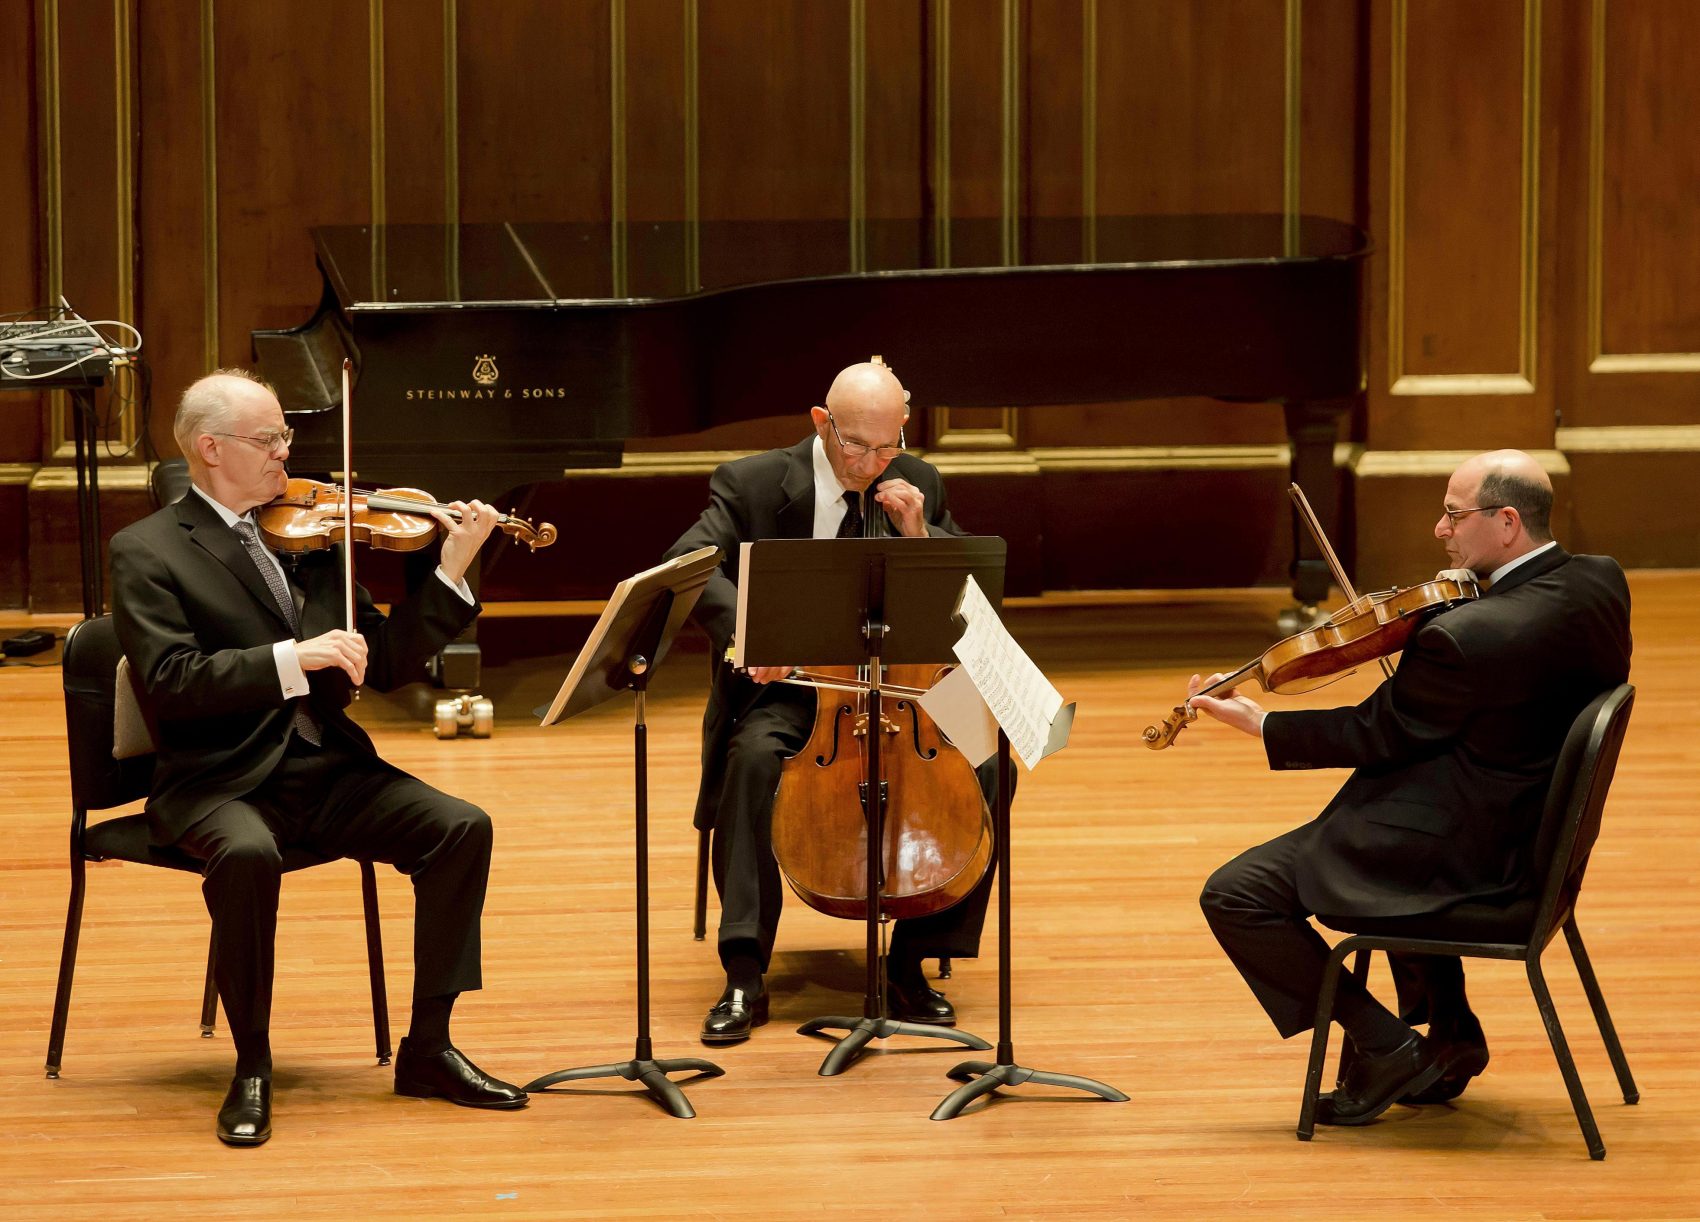 Jules Eskin performing in a Boston Symphony Orchestra concert with Malcolm Lowe (left) and Steven Ansell in 2015. (Courtesy Winslow Townson/Boston Symphony Orchestra)